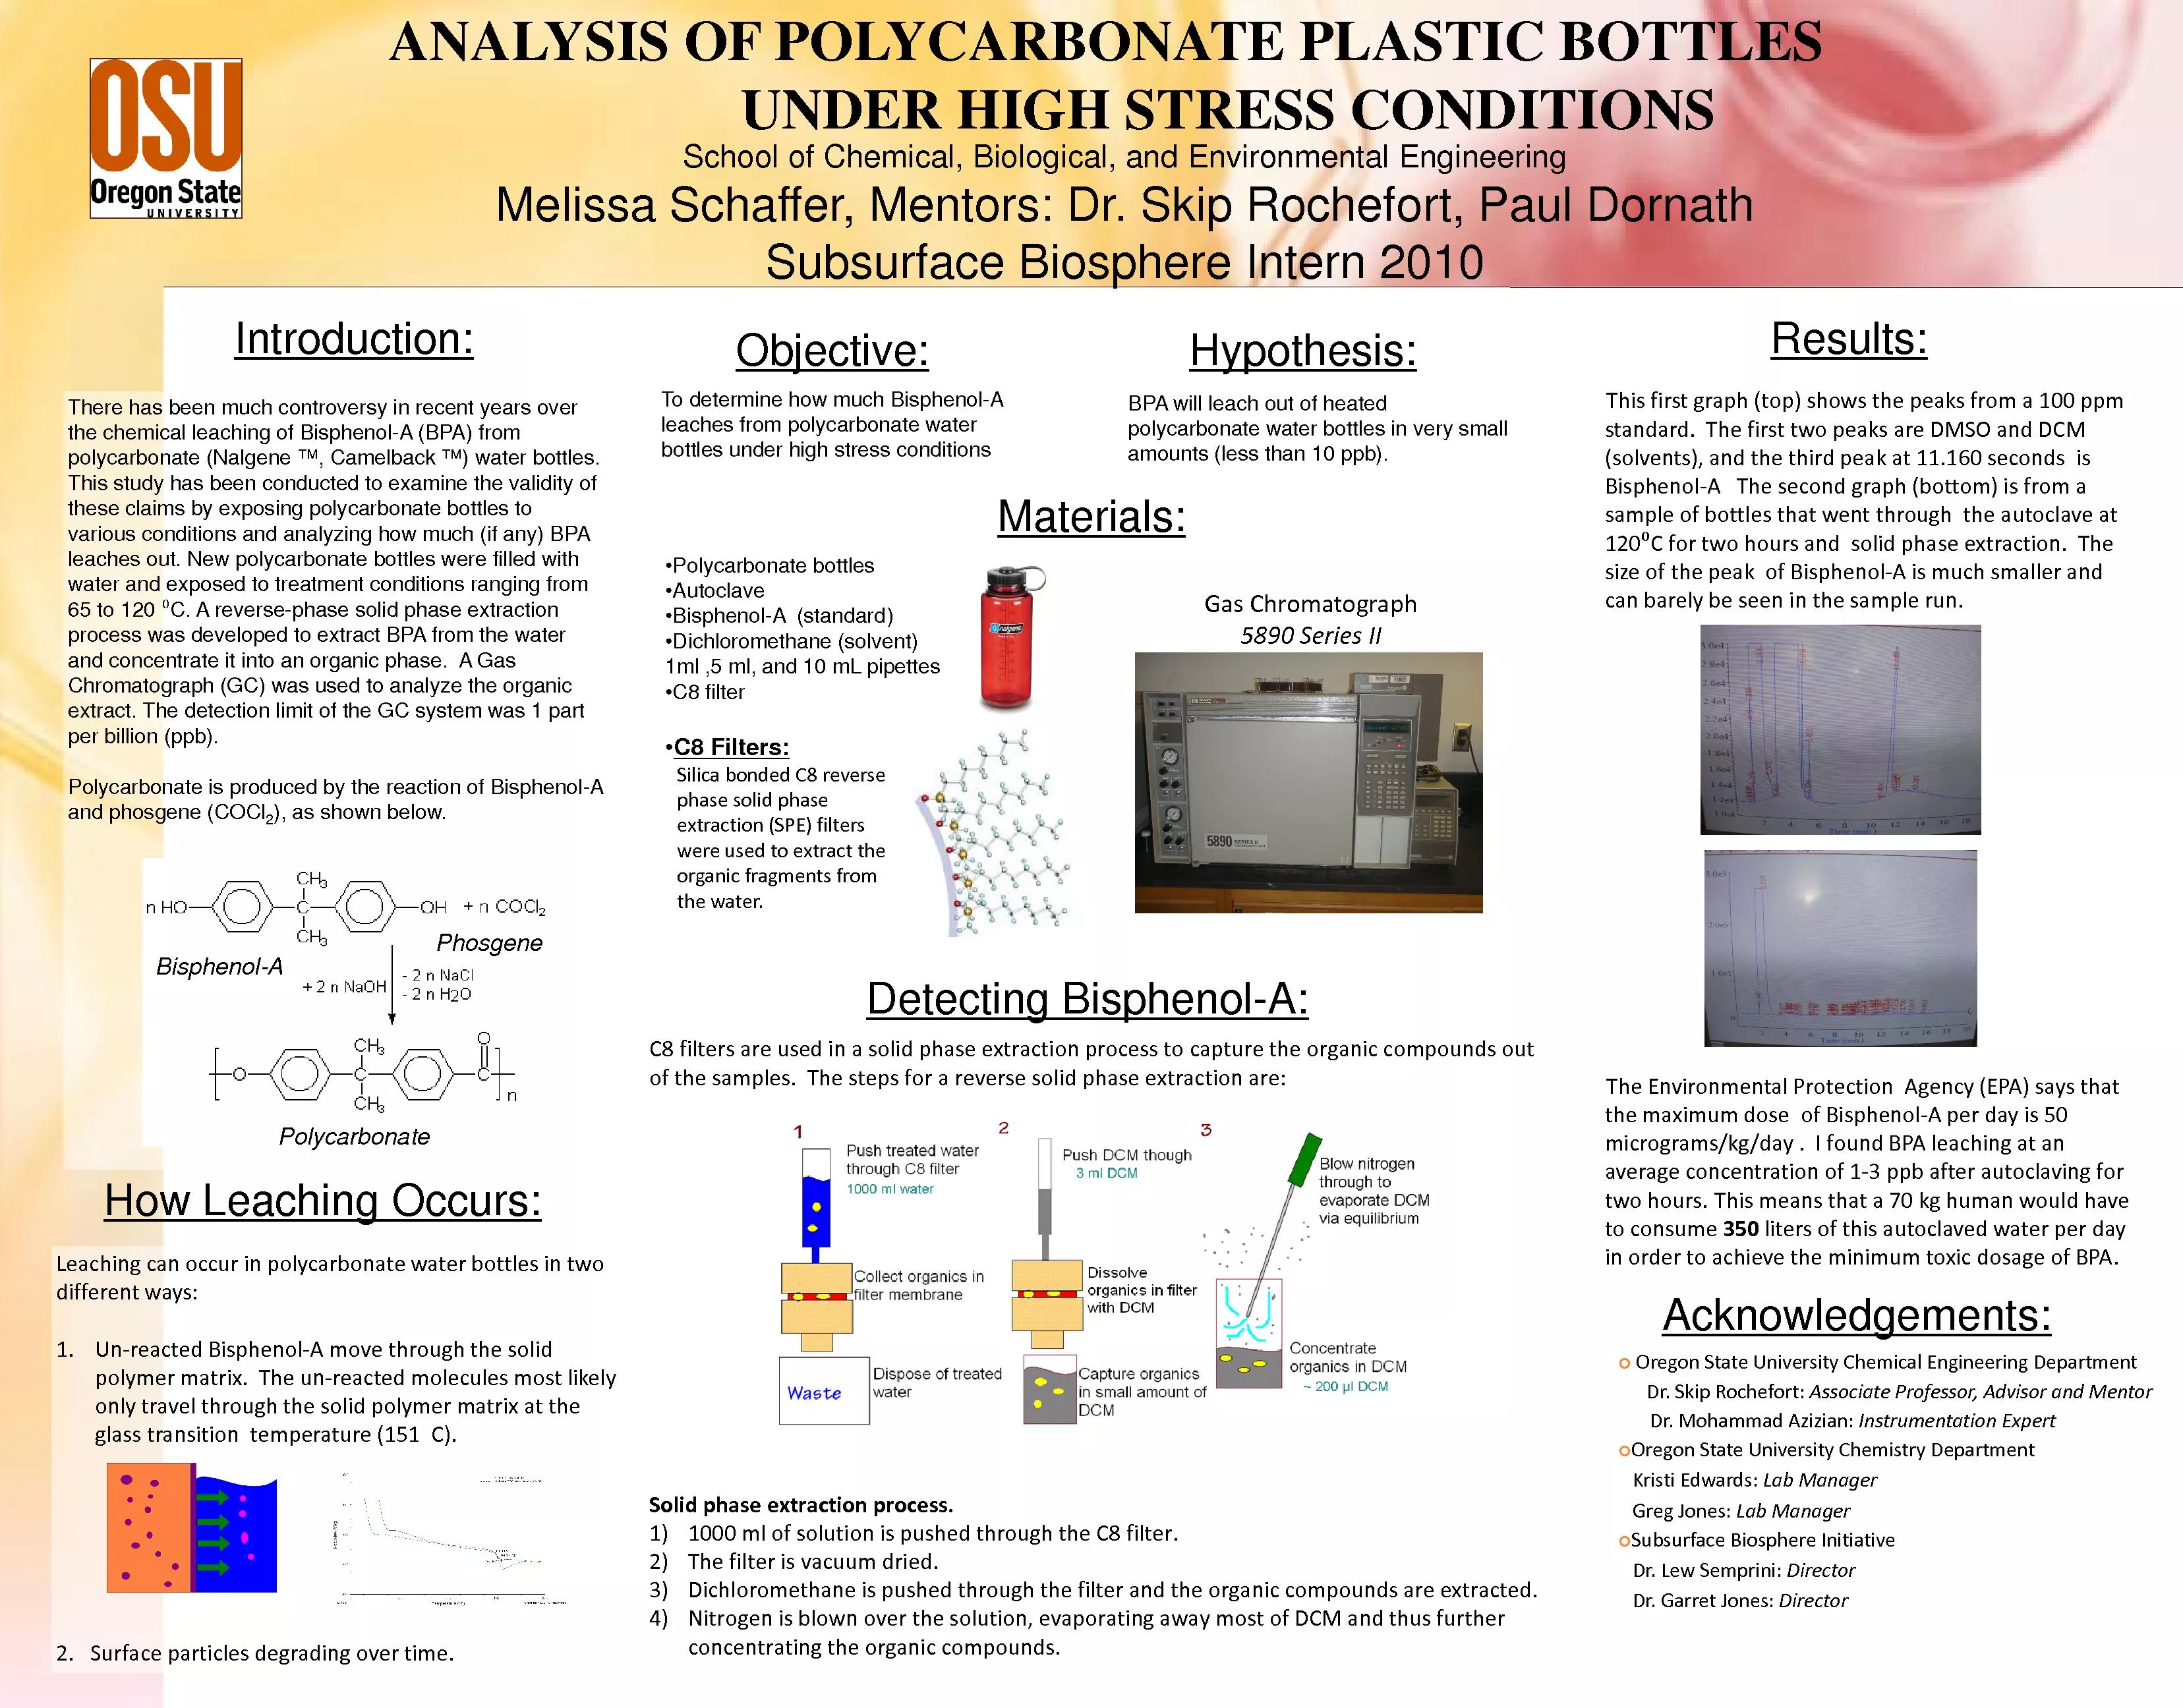 ANALYSIS OF POLYCARBONATE PLASTIC BOTTLES UNDER HIGH STRESS CONDITIONS